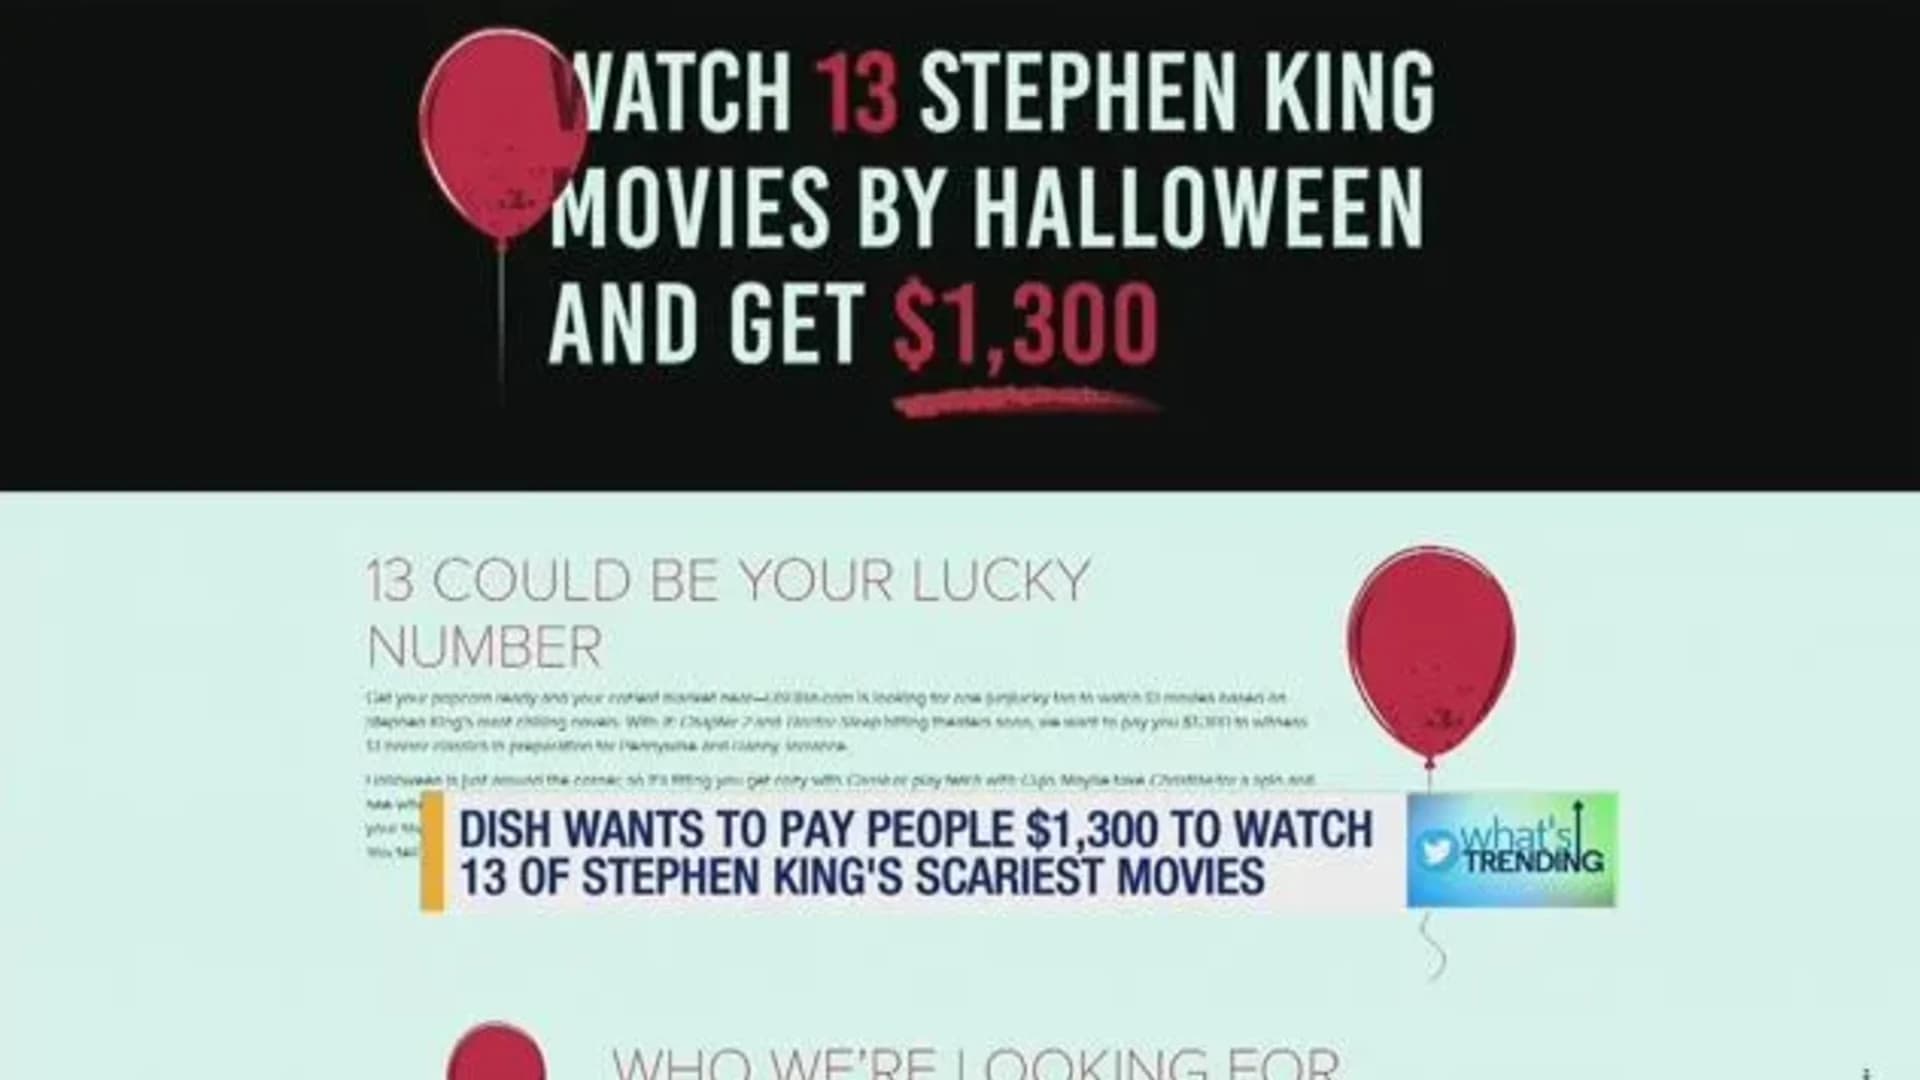 Get paid to watch 13 horror movies by Halloween